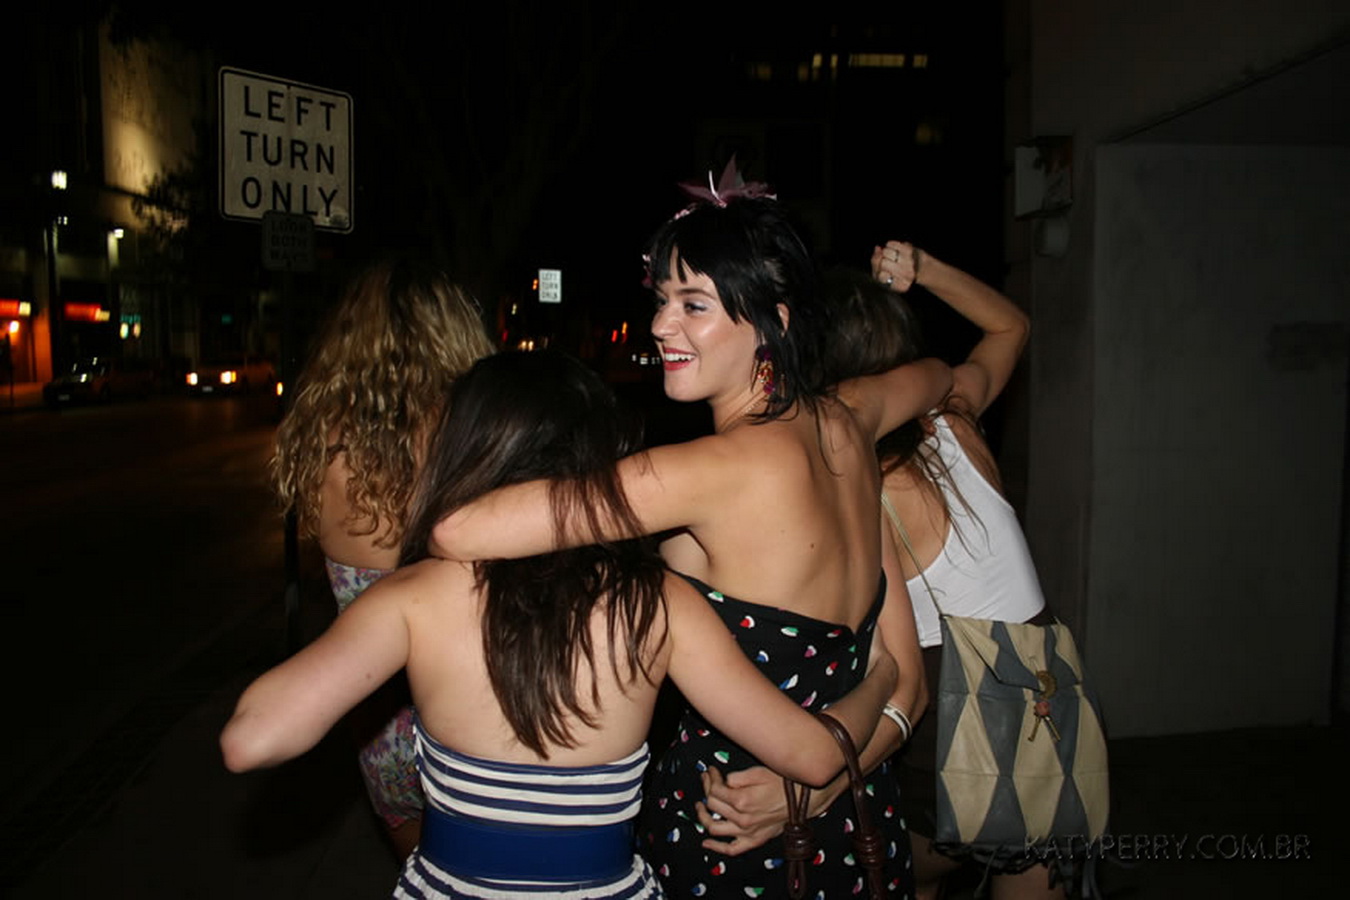 Katy_Perry_bobsslip_drunk_cleavage_downblouse_upskirt_nipslip_at_her_birthday_2007_party_99x_HQ_82.jpg